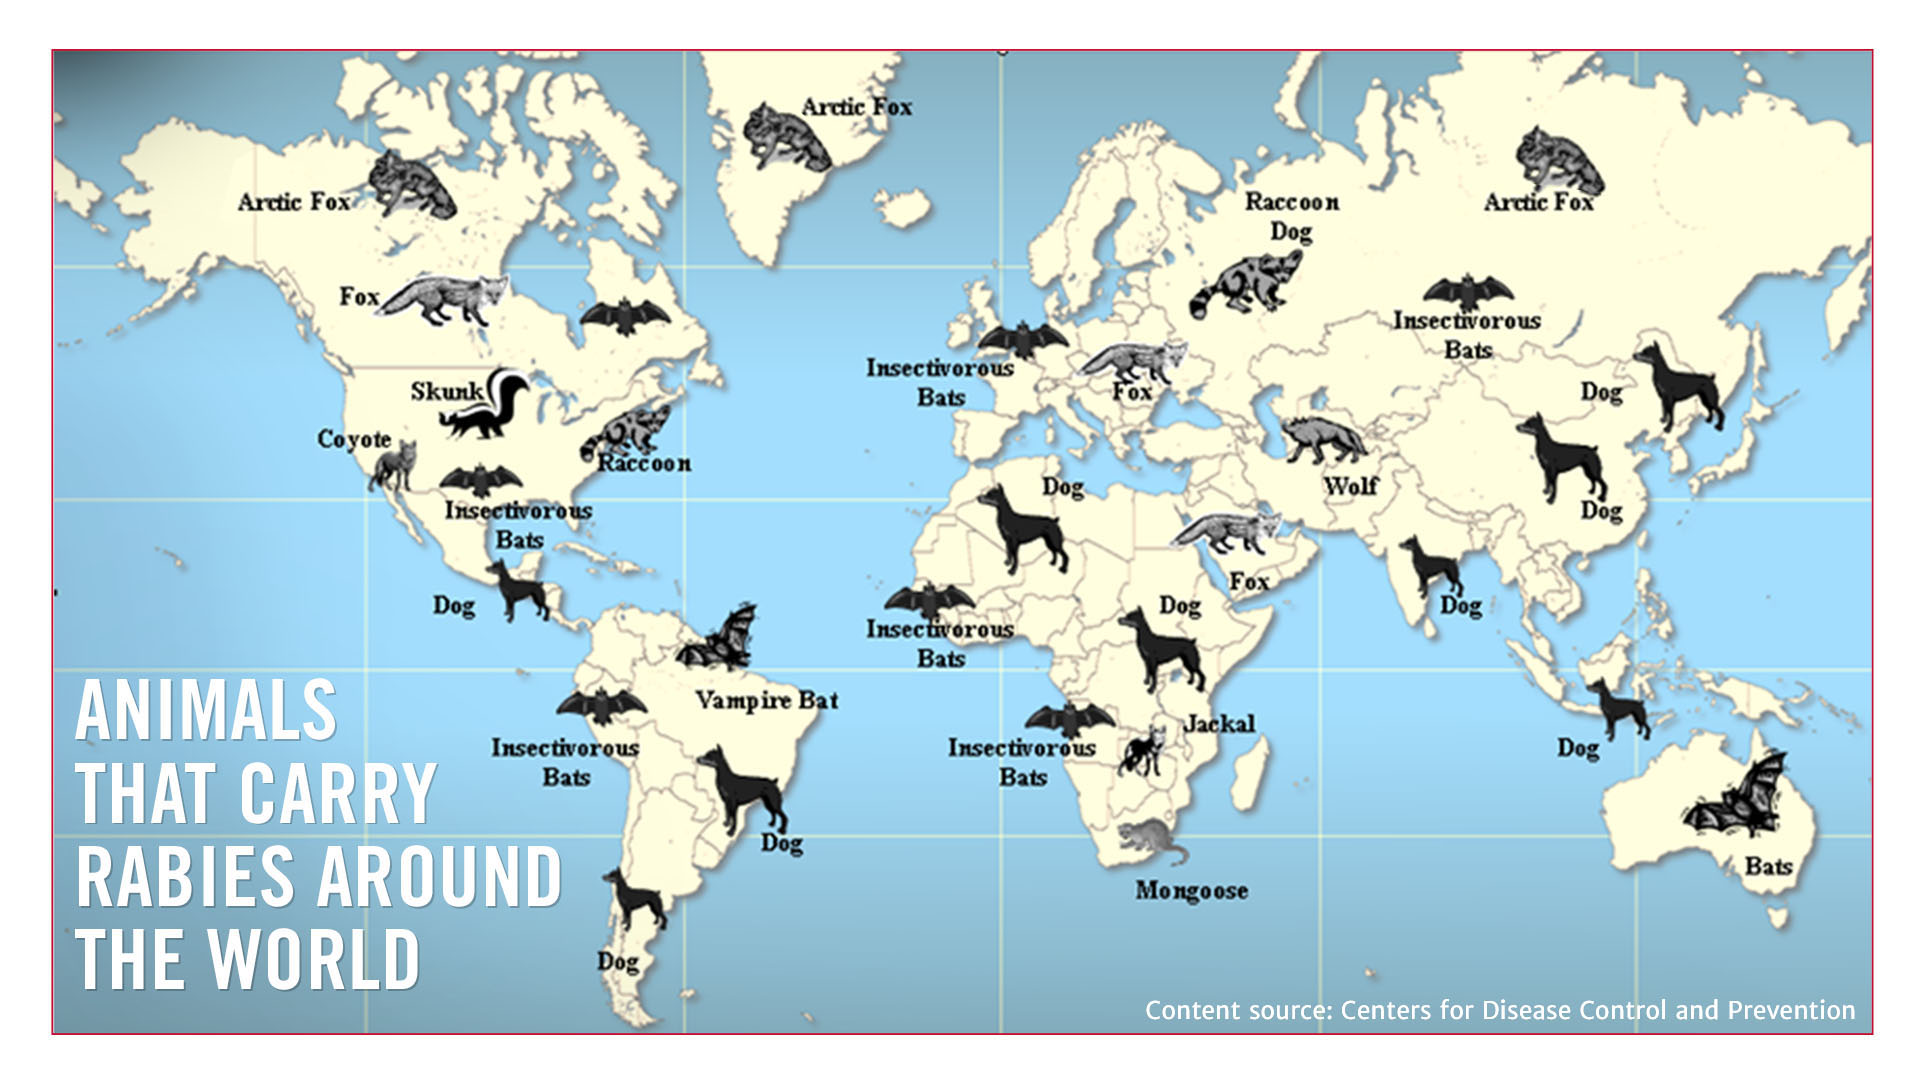 Animals that carry rabies around the world